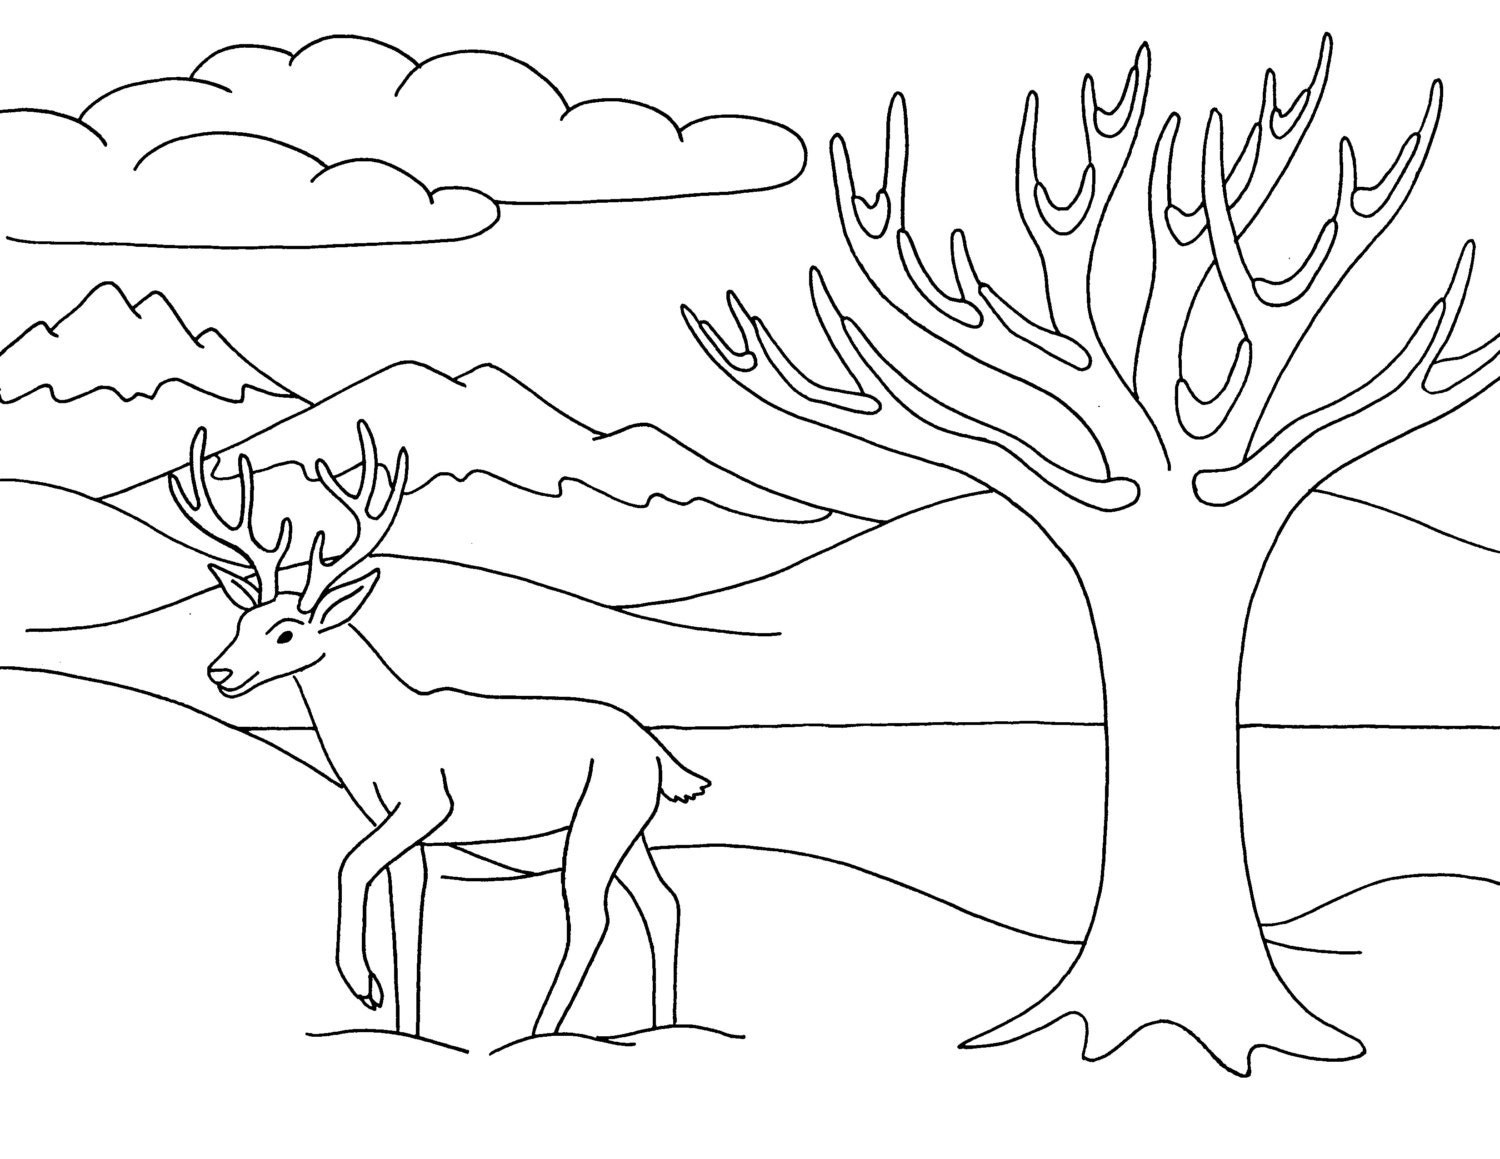 Snowy Scene Deer Printable Coloring Page by BIGCOLORFULWORLD